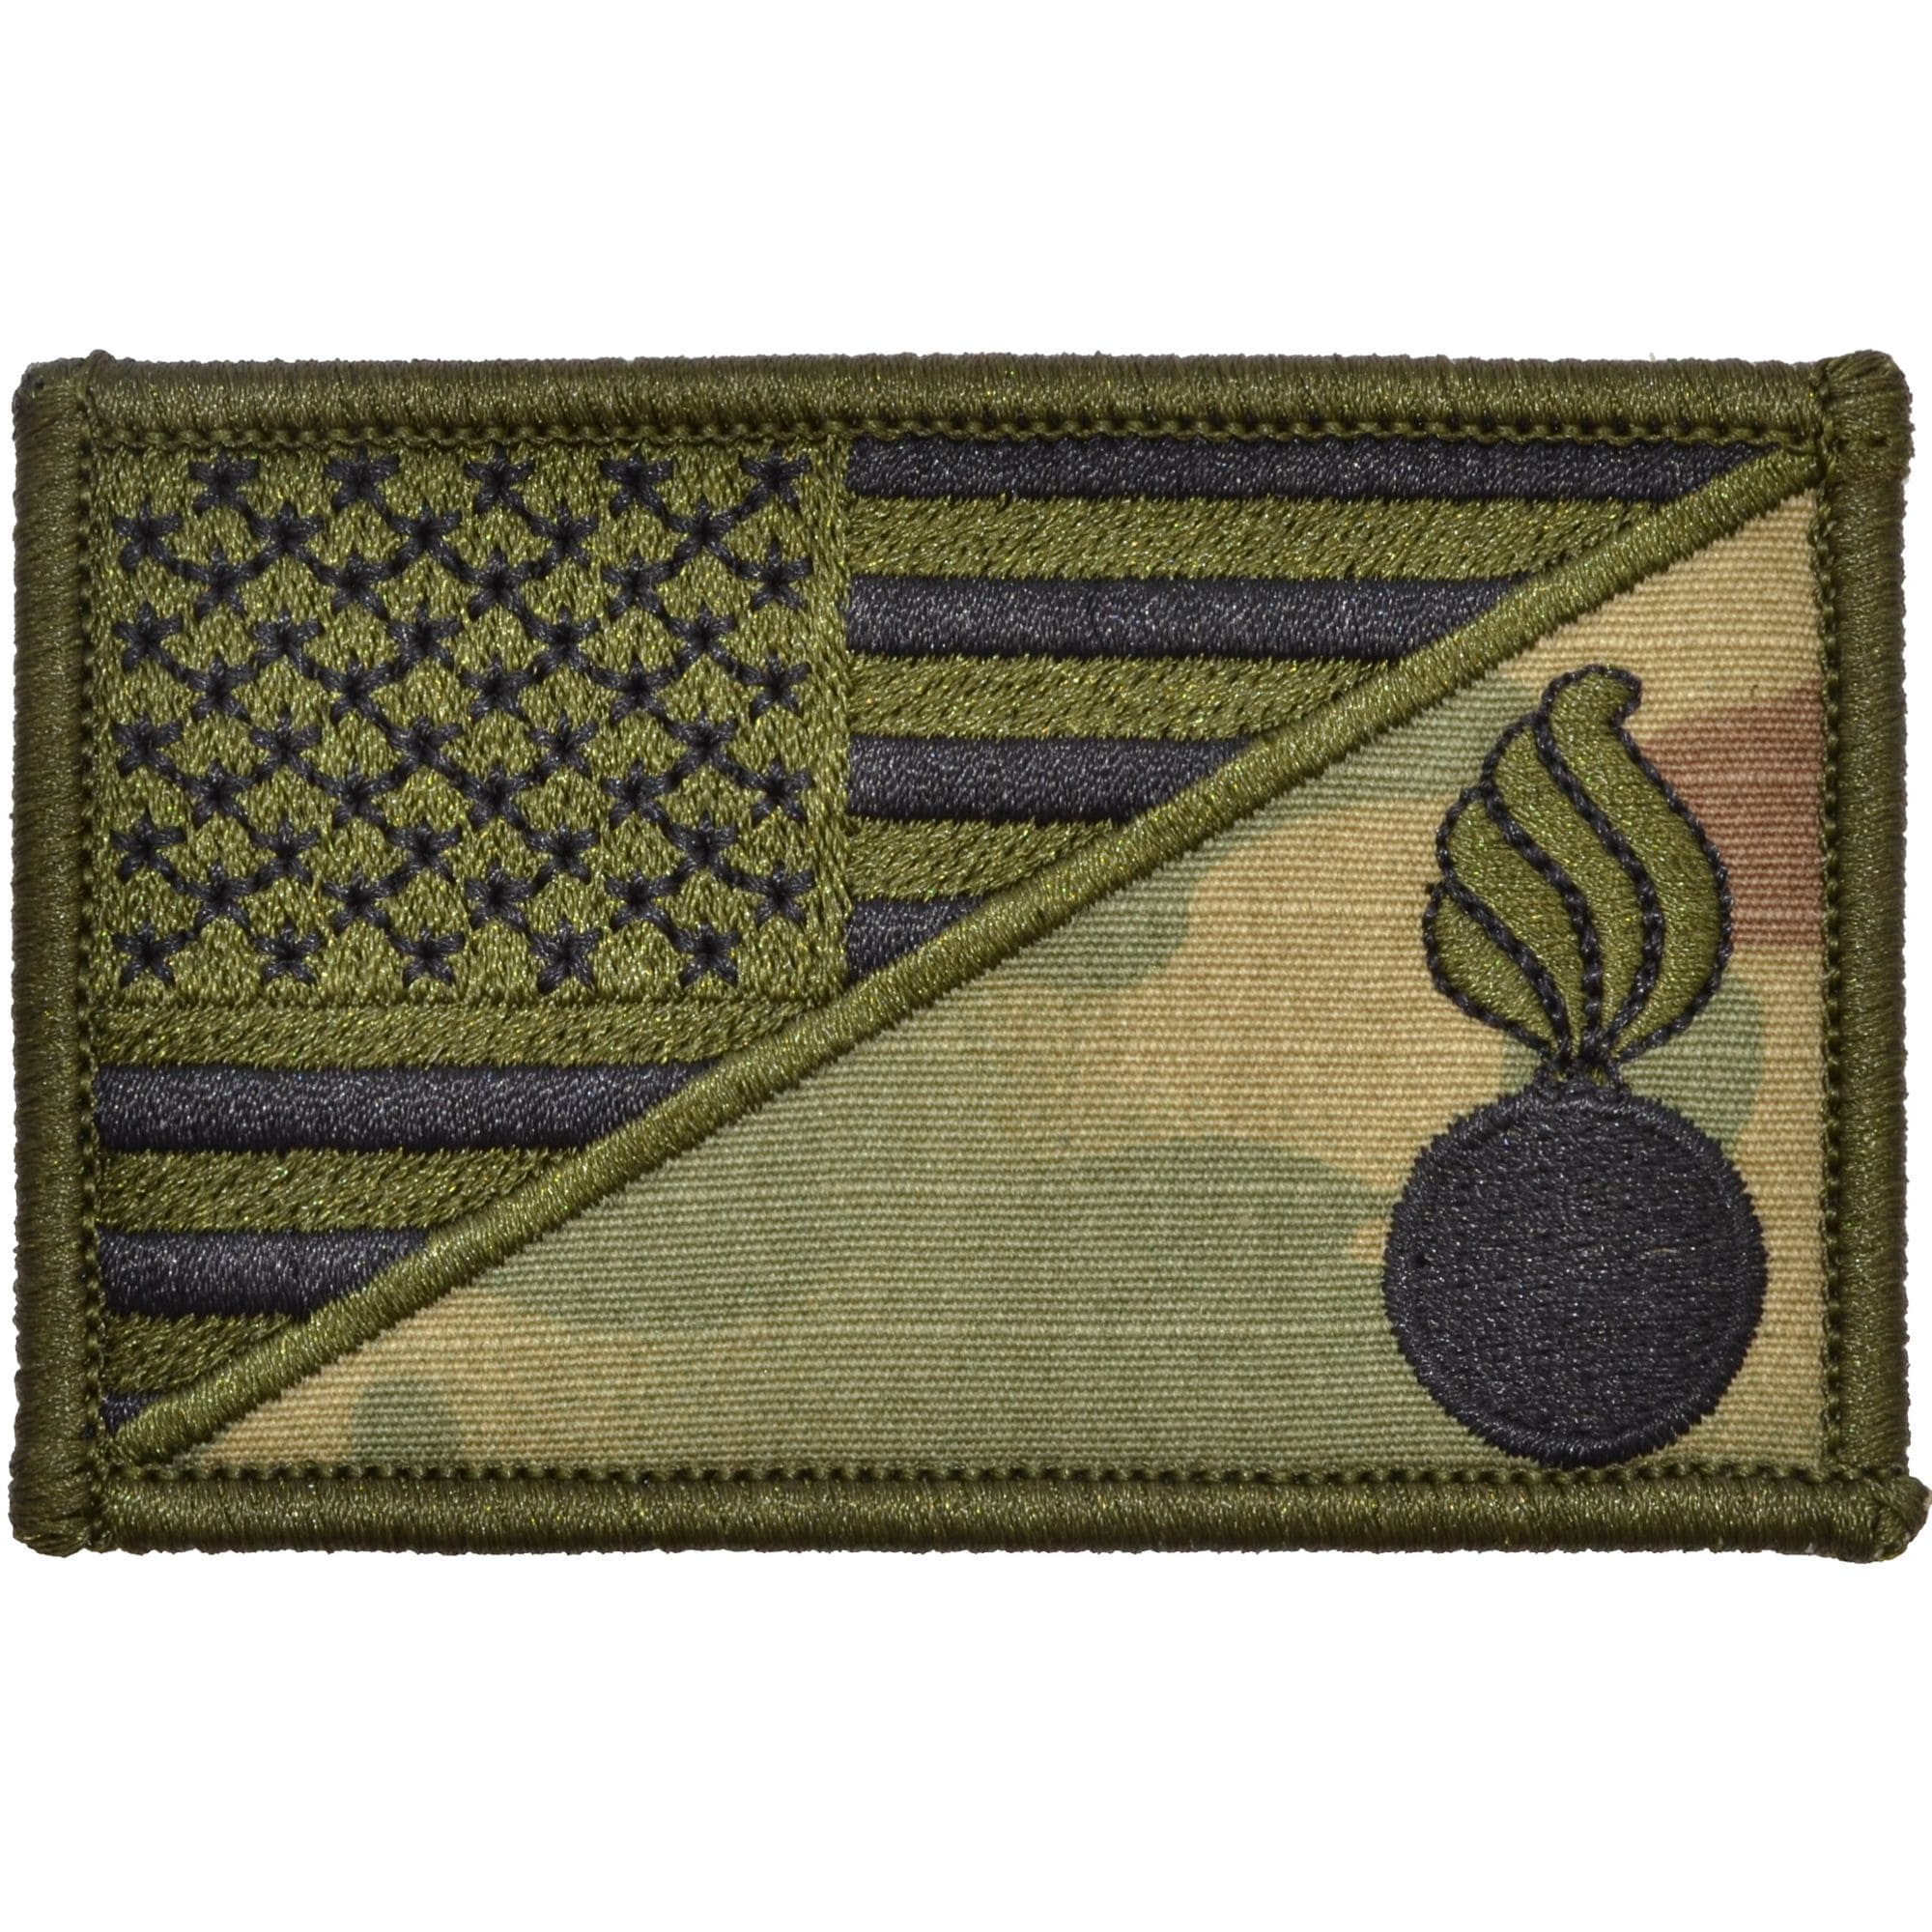 Tactical Gear Junkie Patches MultiCam Army Ordnance Corps USA Flag - 2.25x3.5 Patch